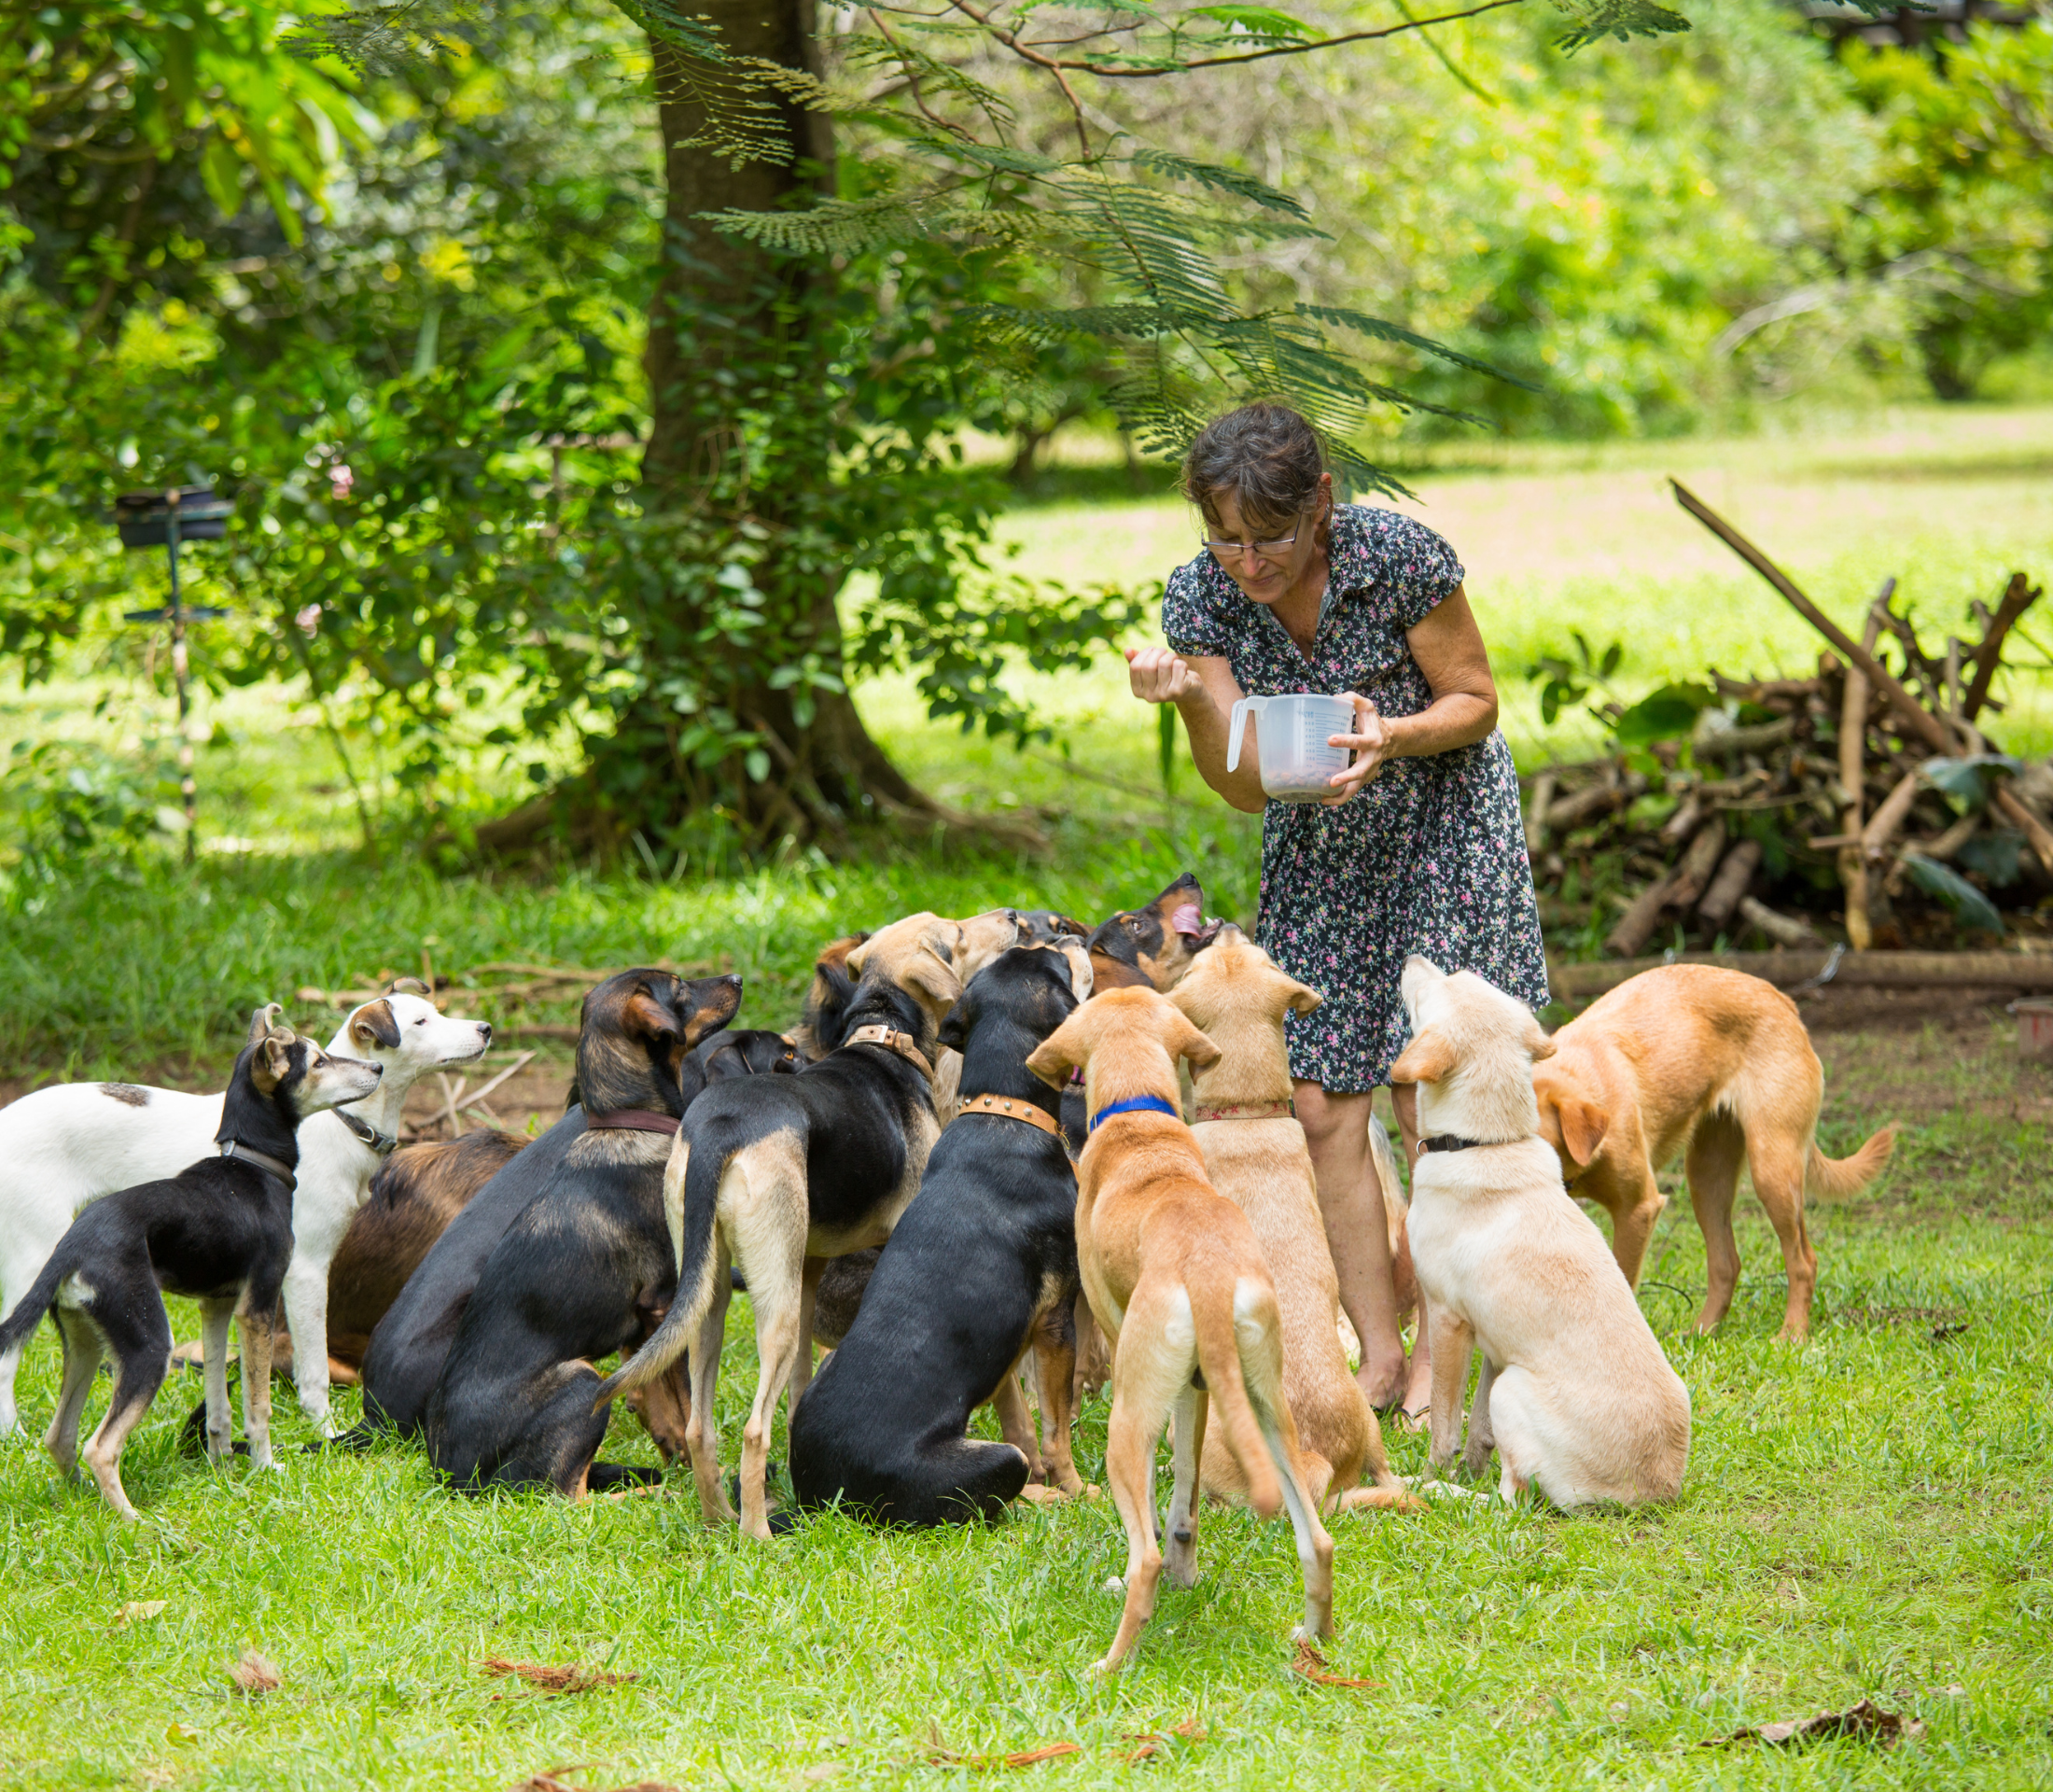 Group of rescue dogs eating around an older lady